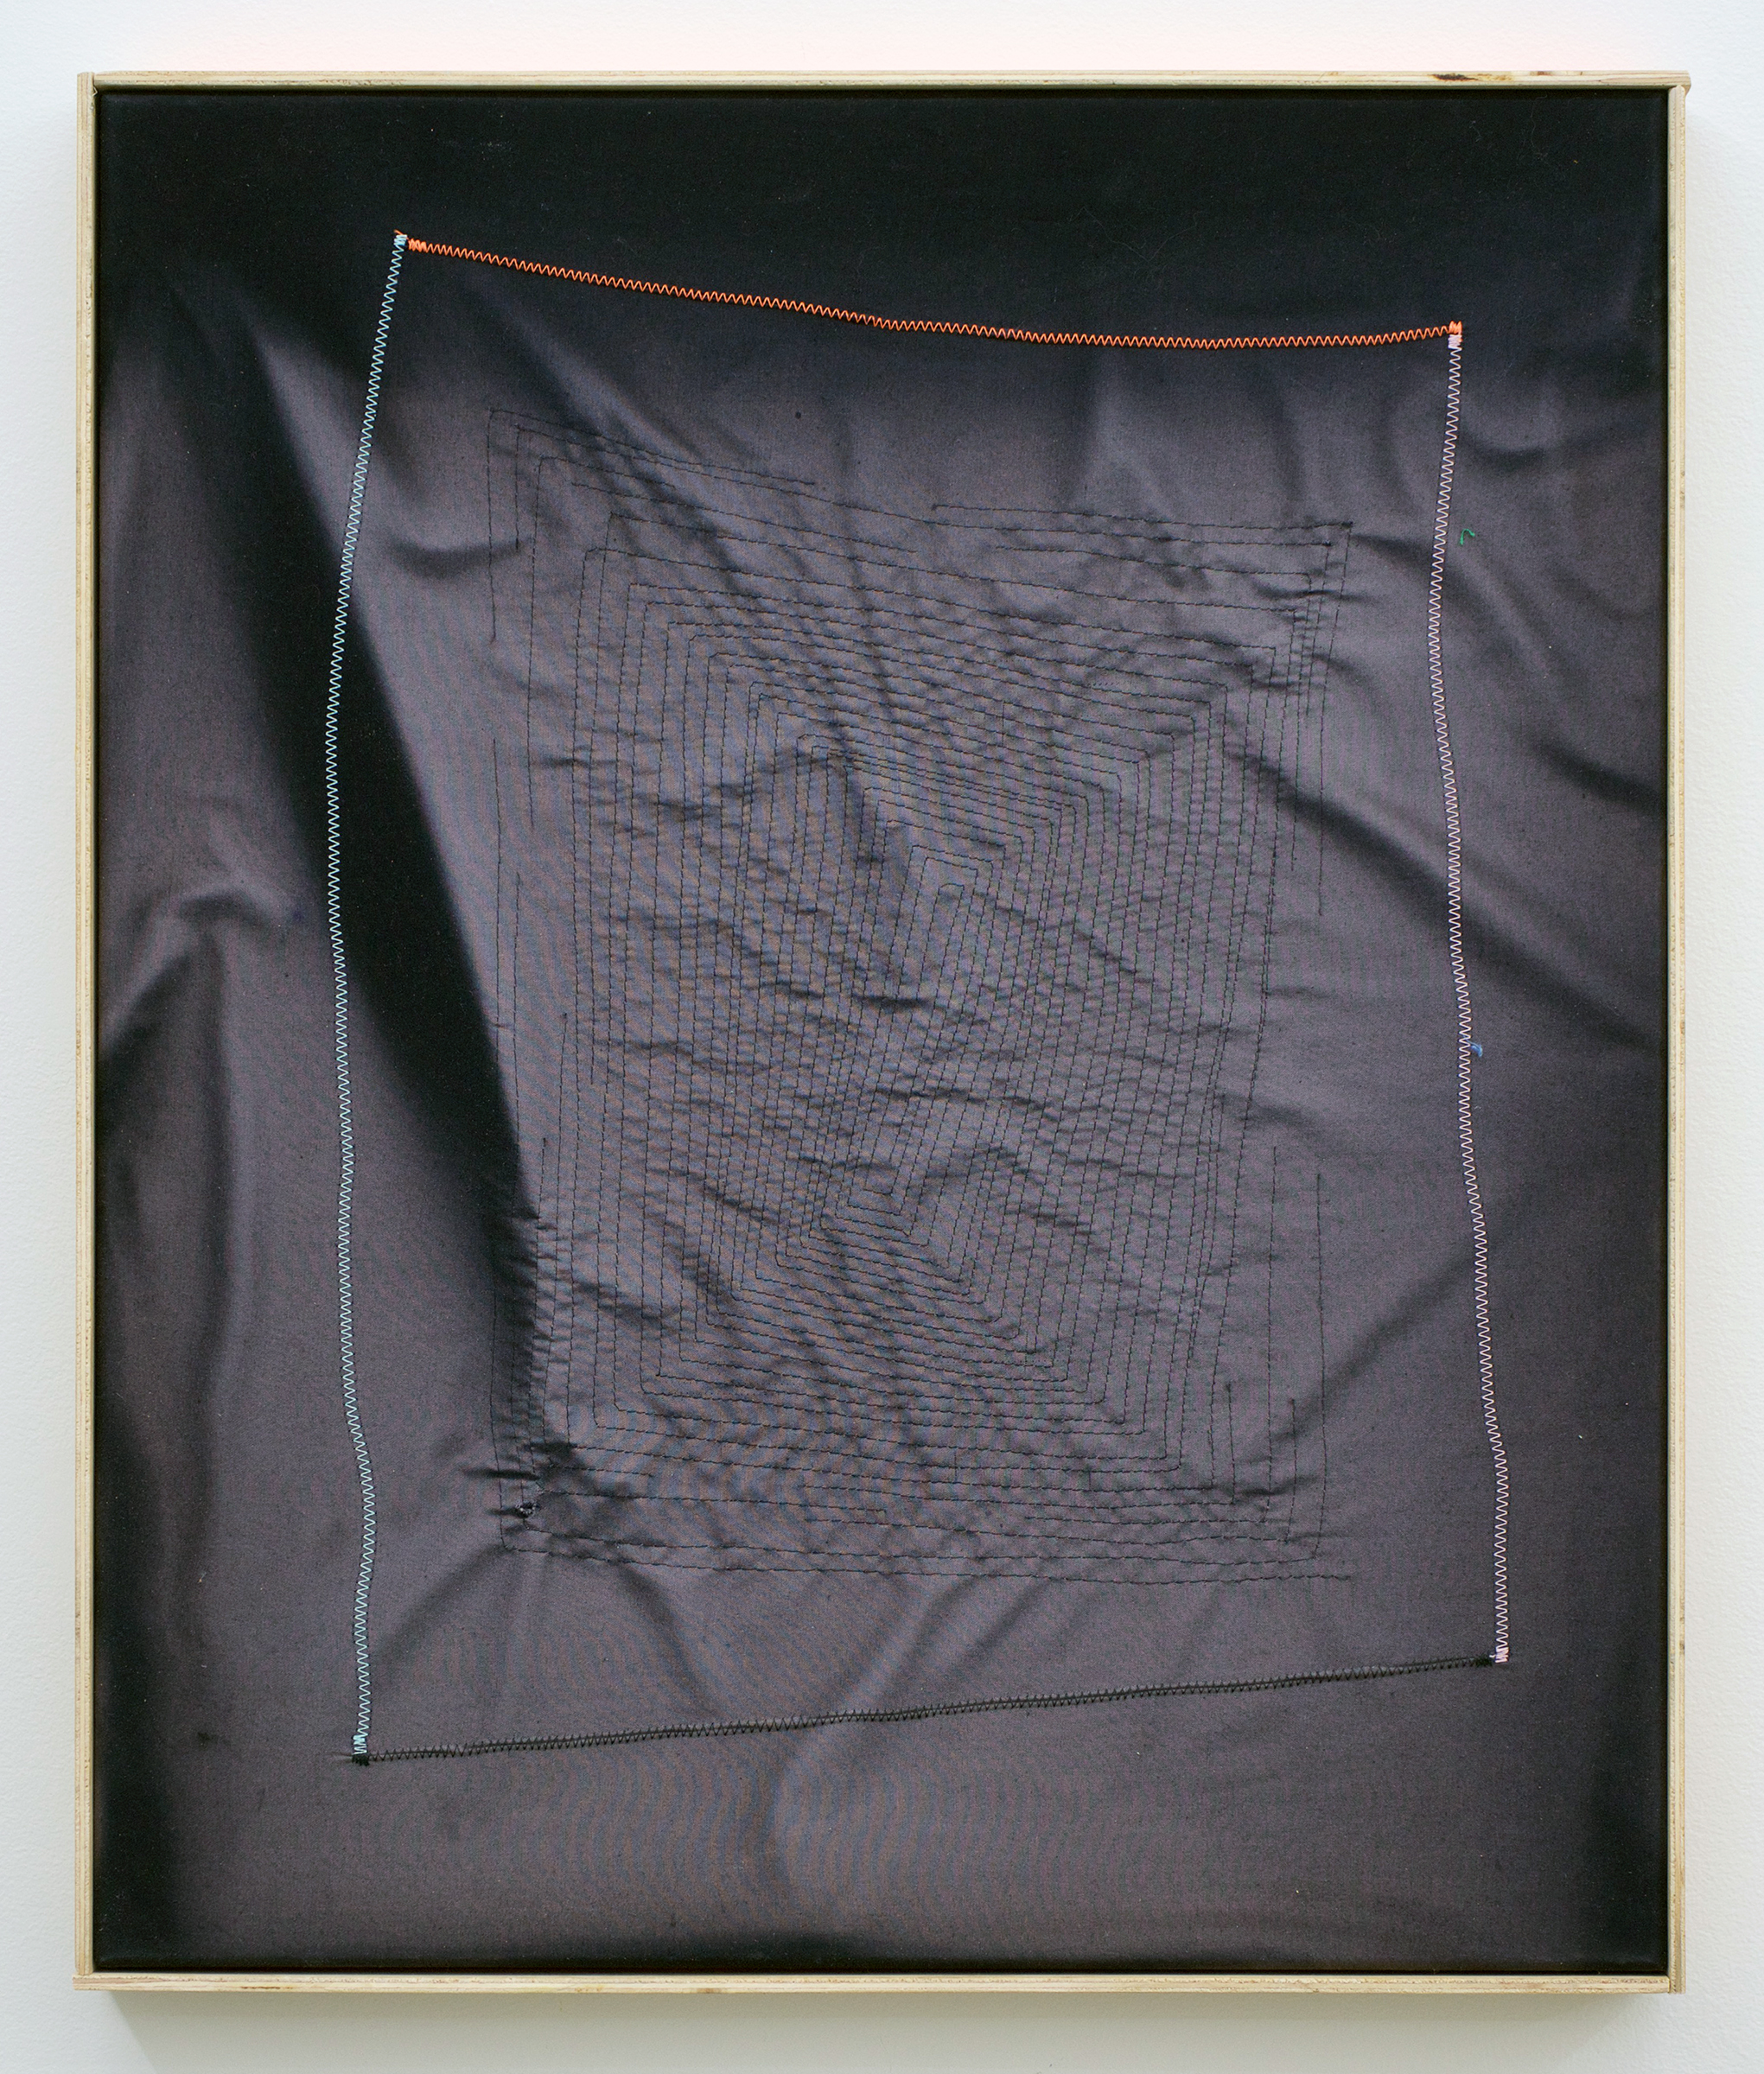   CHRIS DUNCAN   Ghost Pattern #1 (Summer/Winter 2016) Six-Month Exposure/Oakland , 2017, sun, time and thread on fabric, 24 1/2" x 20 1/2" 